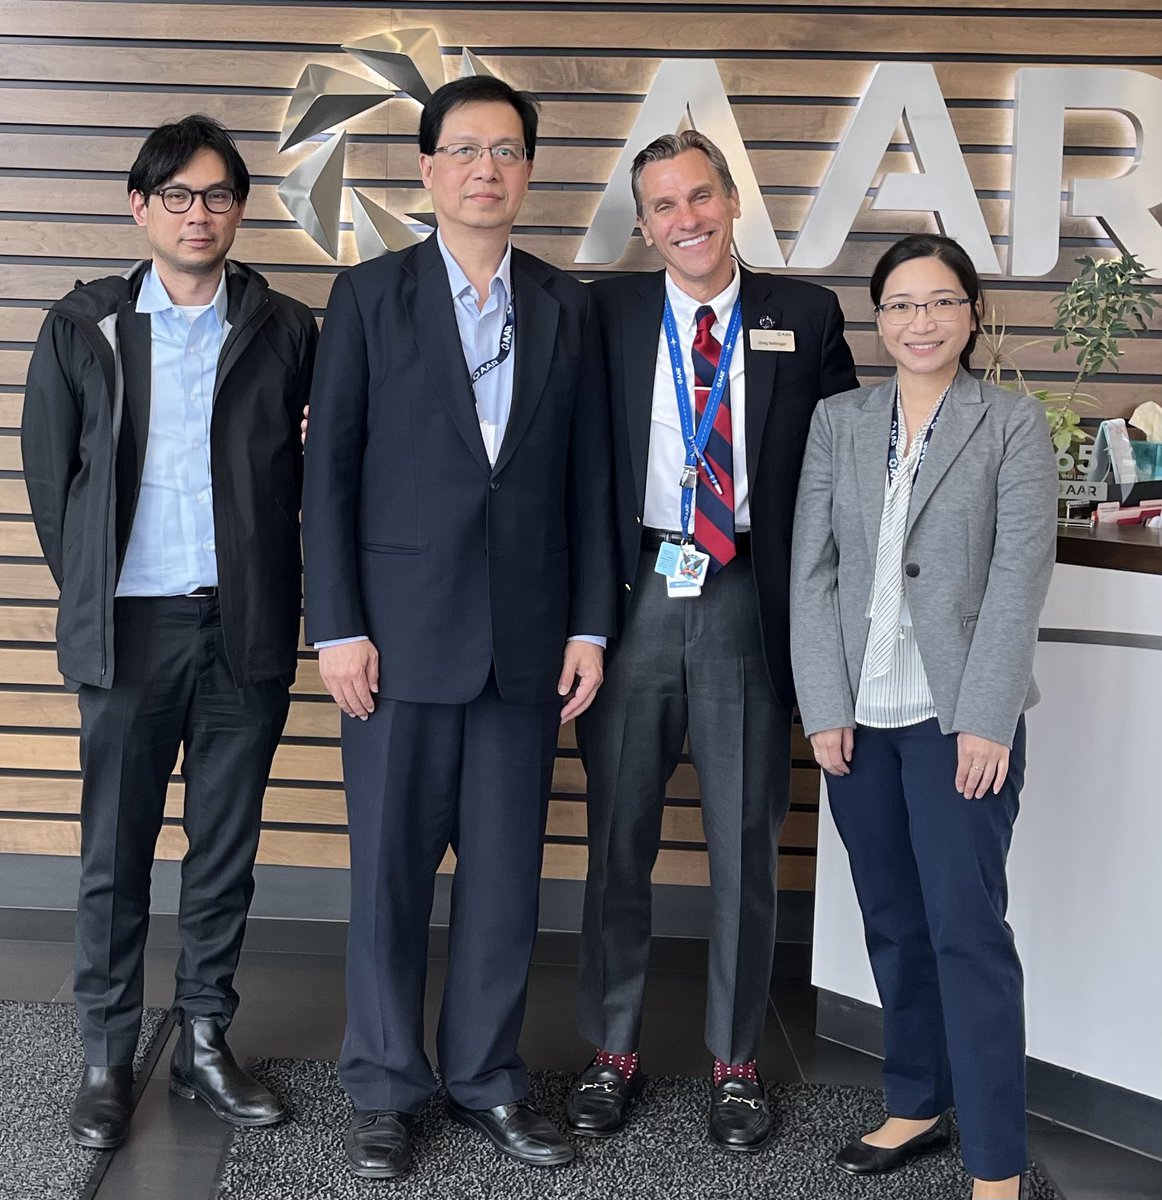 #DoingItRight Now with #PeopleFirst: #Gratitude to the #Thailand Board Of Investment for ‘flying by’ the World Headquarters of the #BestTeamInAviation. With the @AARCORP Component Services station in Chonburi, We ‘AAR’ Where The Action Is-pronounced Are!RT #GlobalReach #WeAreAAR